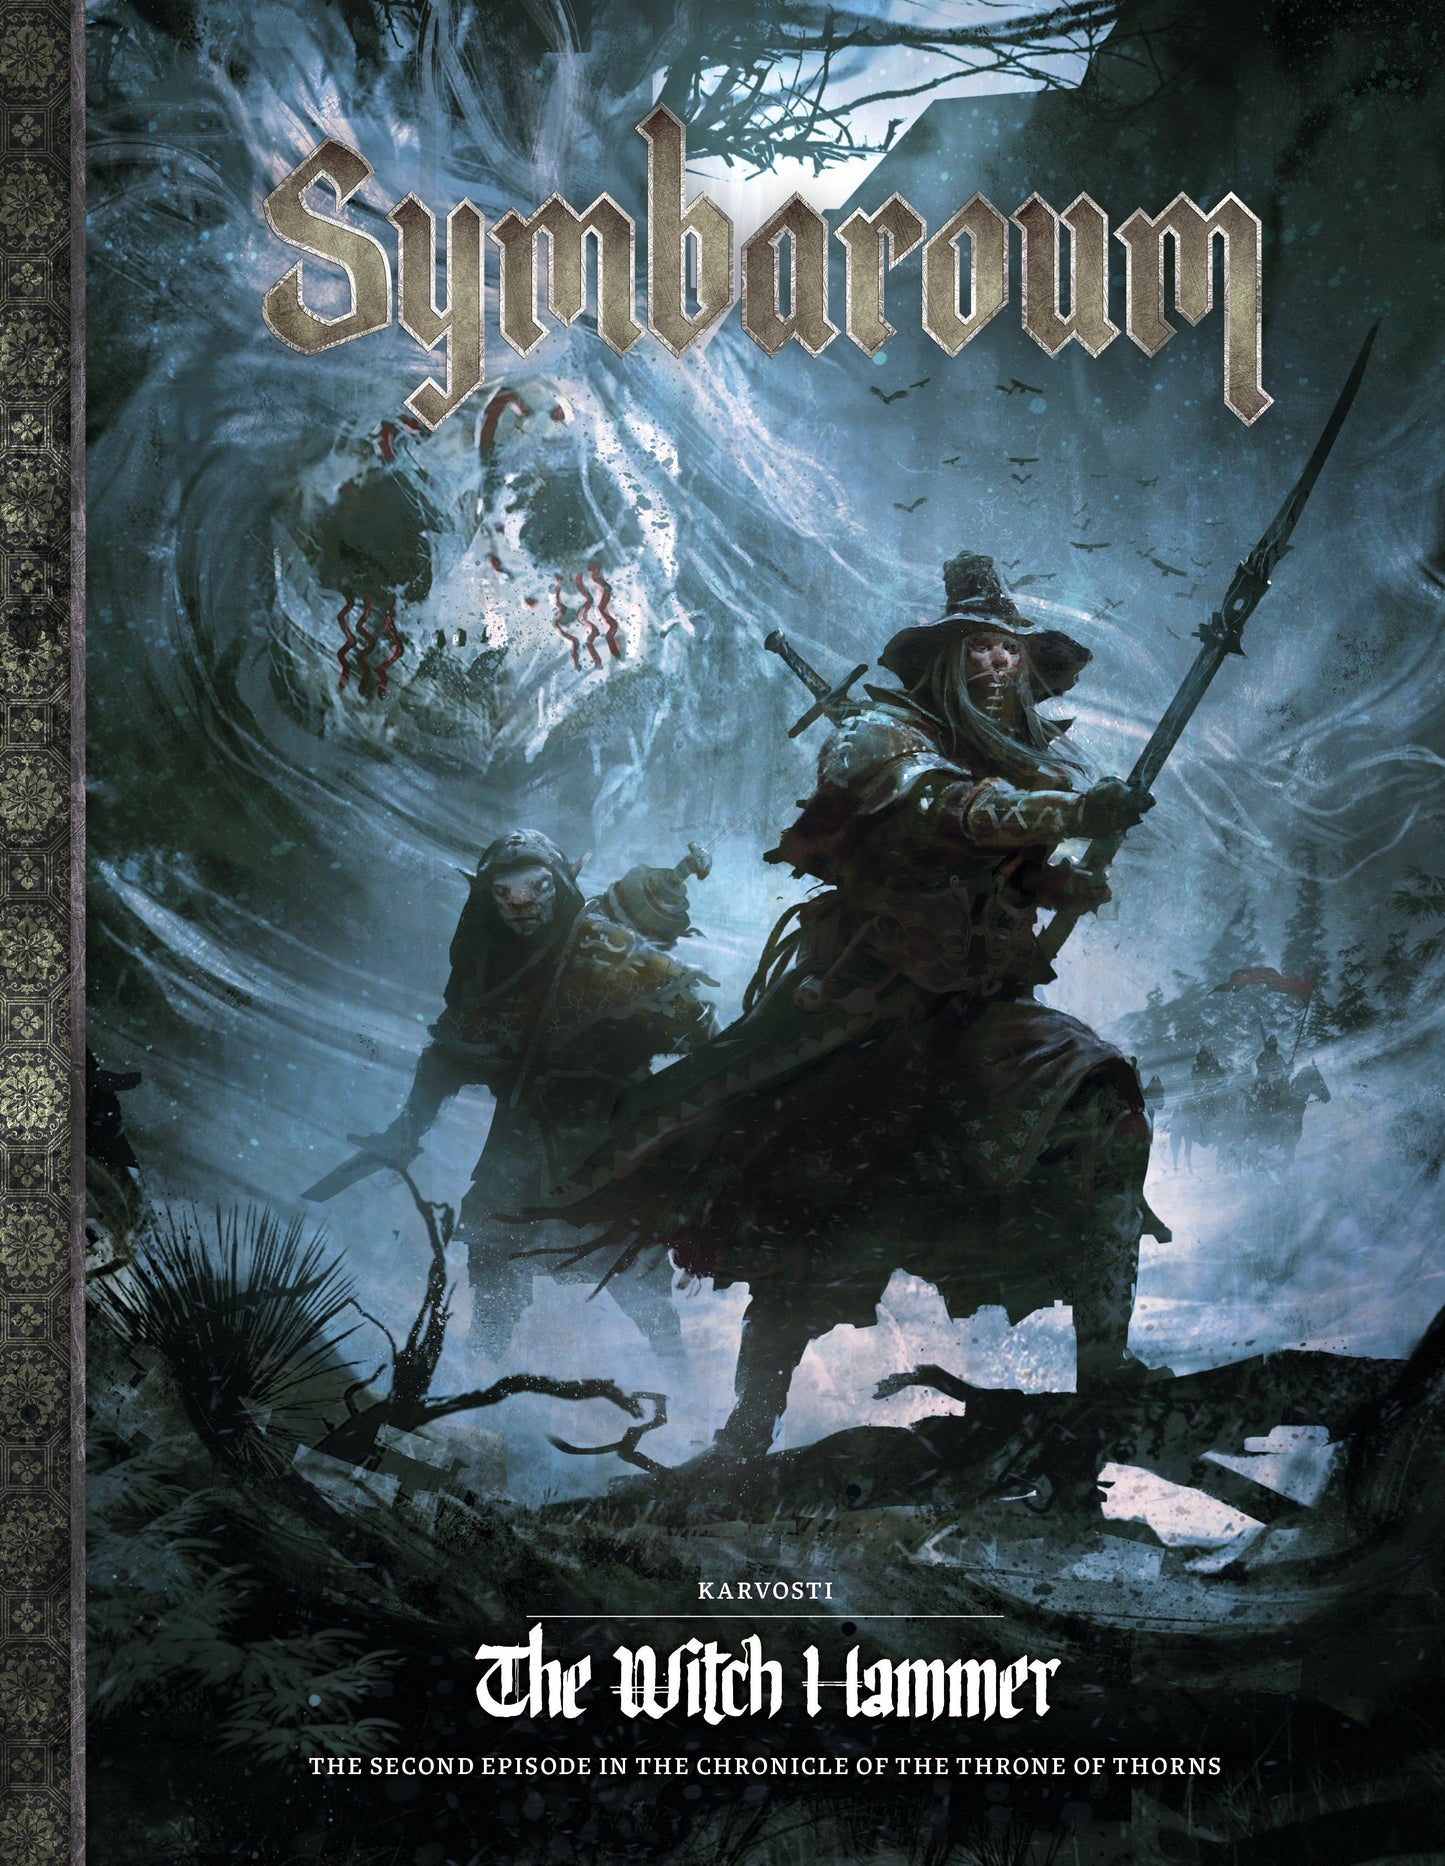 SYMBAROUM: THE WITCH HAMMER